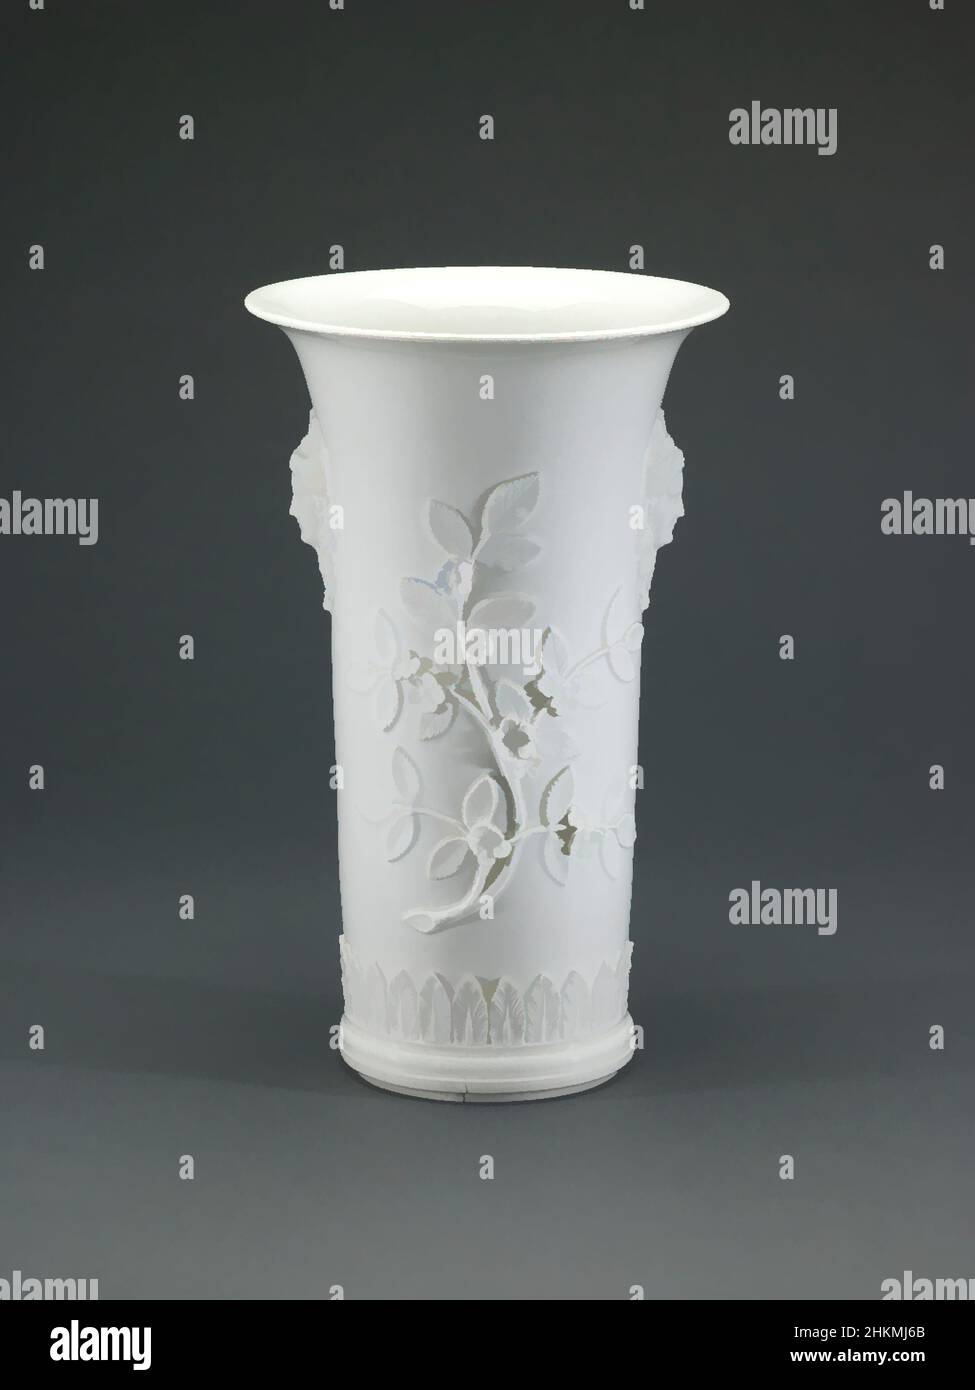 Art inspired by Beaker Vase, Meissen Porcelain Factory, Germany, founded 1710, 1713-20, Glazed porcelain, Made in Meissen, Germany, Europe, Ceramics, containers, 9 1/2 x 5 3/4 in. (24.1 x 14.6 cm, Classic works modernized by Artotop with a splash of modernity. Shapes, color and value, eye-catching visual impact on art. Emotions through freedom of artworks in a contemporary way. A timeless message pursuing a wildly creative new direction. Artists turning to the digital medium and creating the Artotop NFT Stock Photo